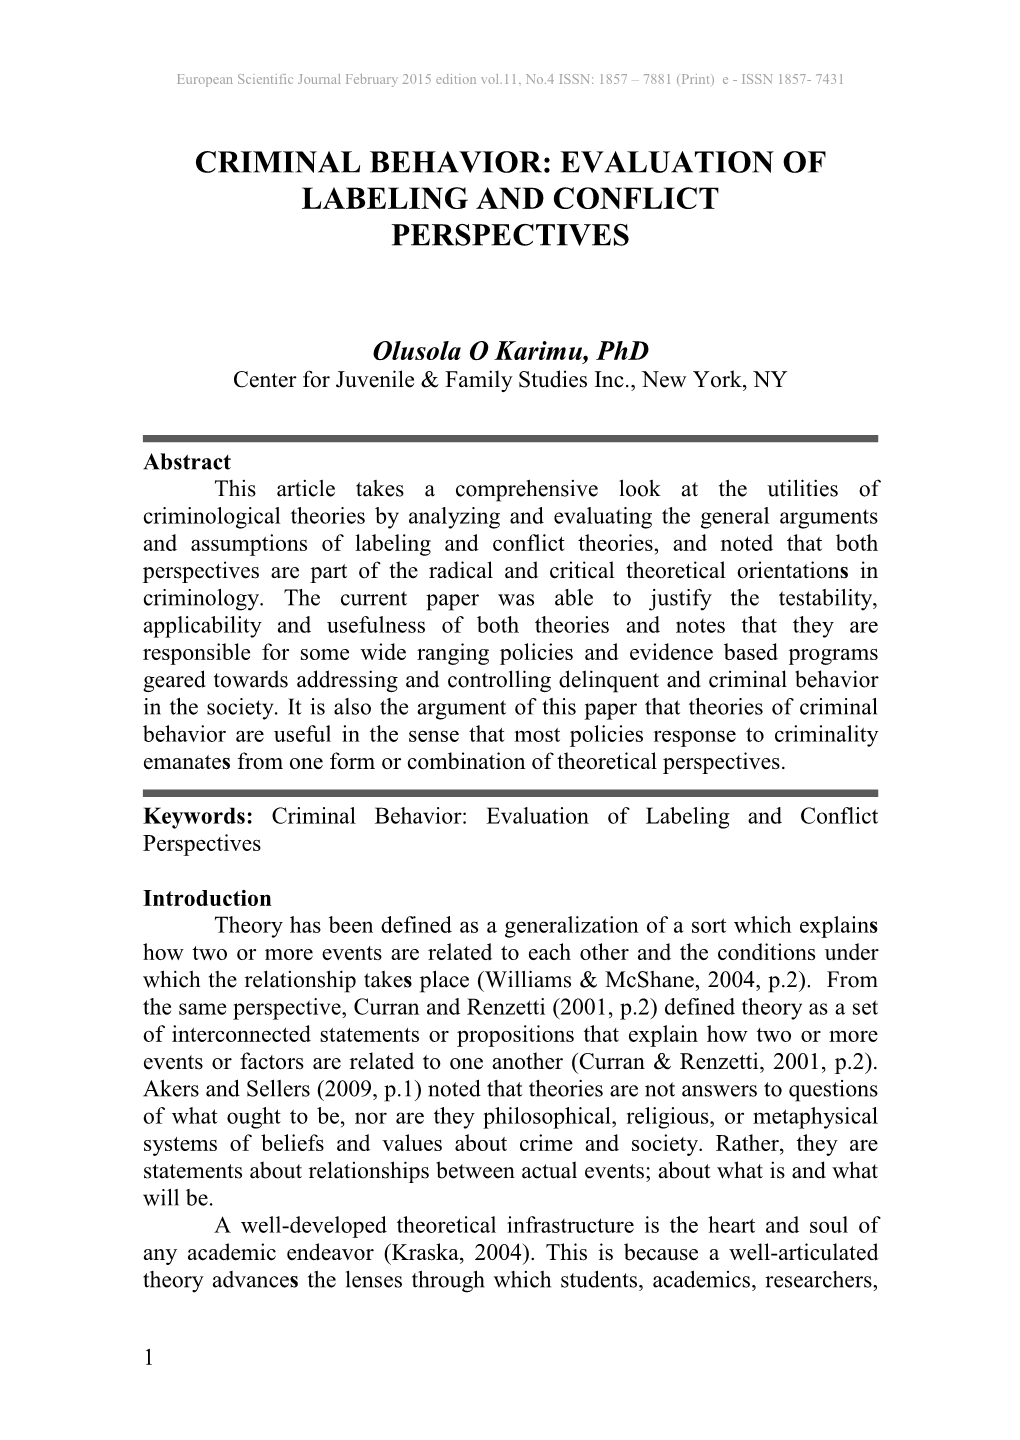 Criminal Behavior: Evaluation of Labeling and Conflict Perspectives